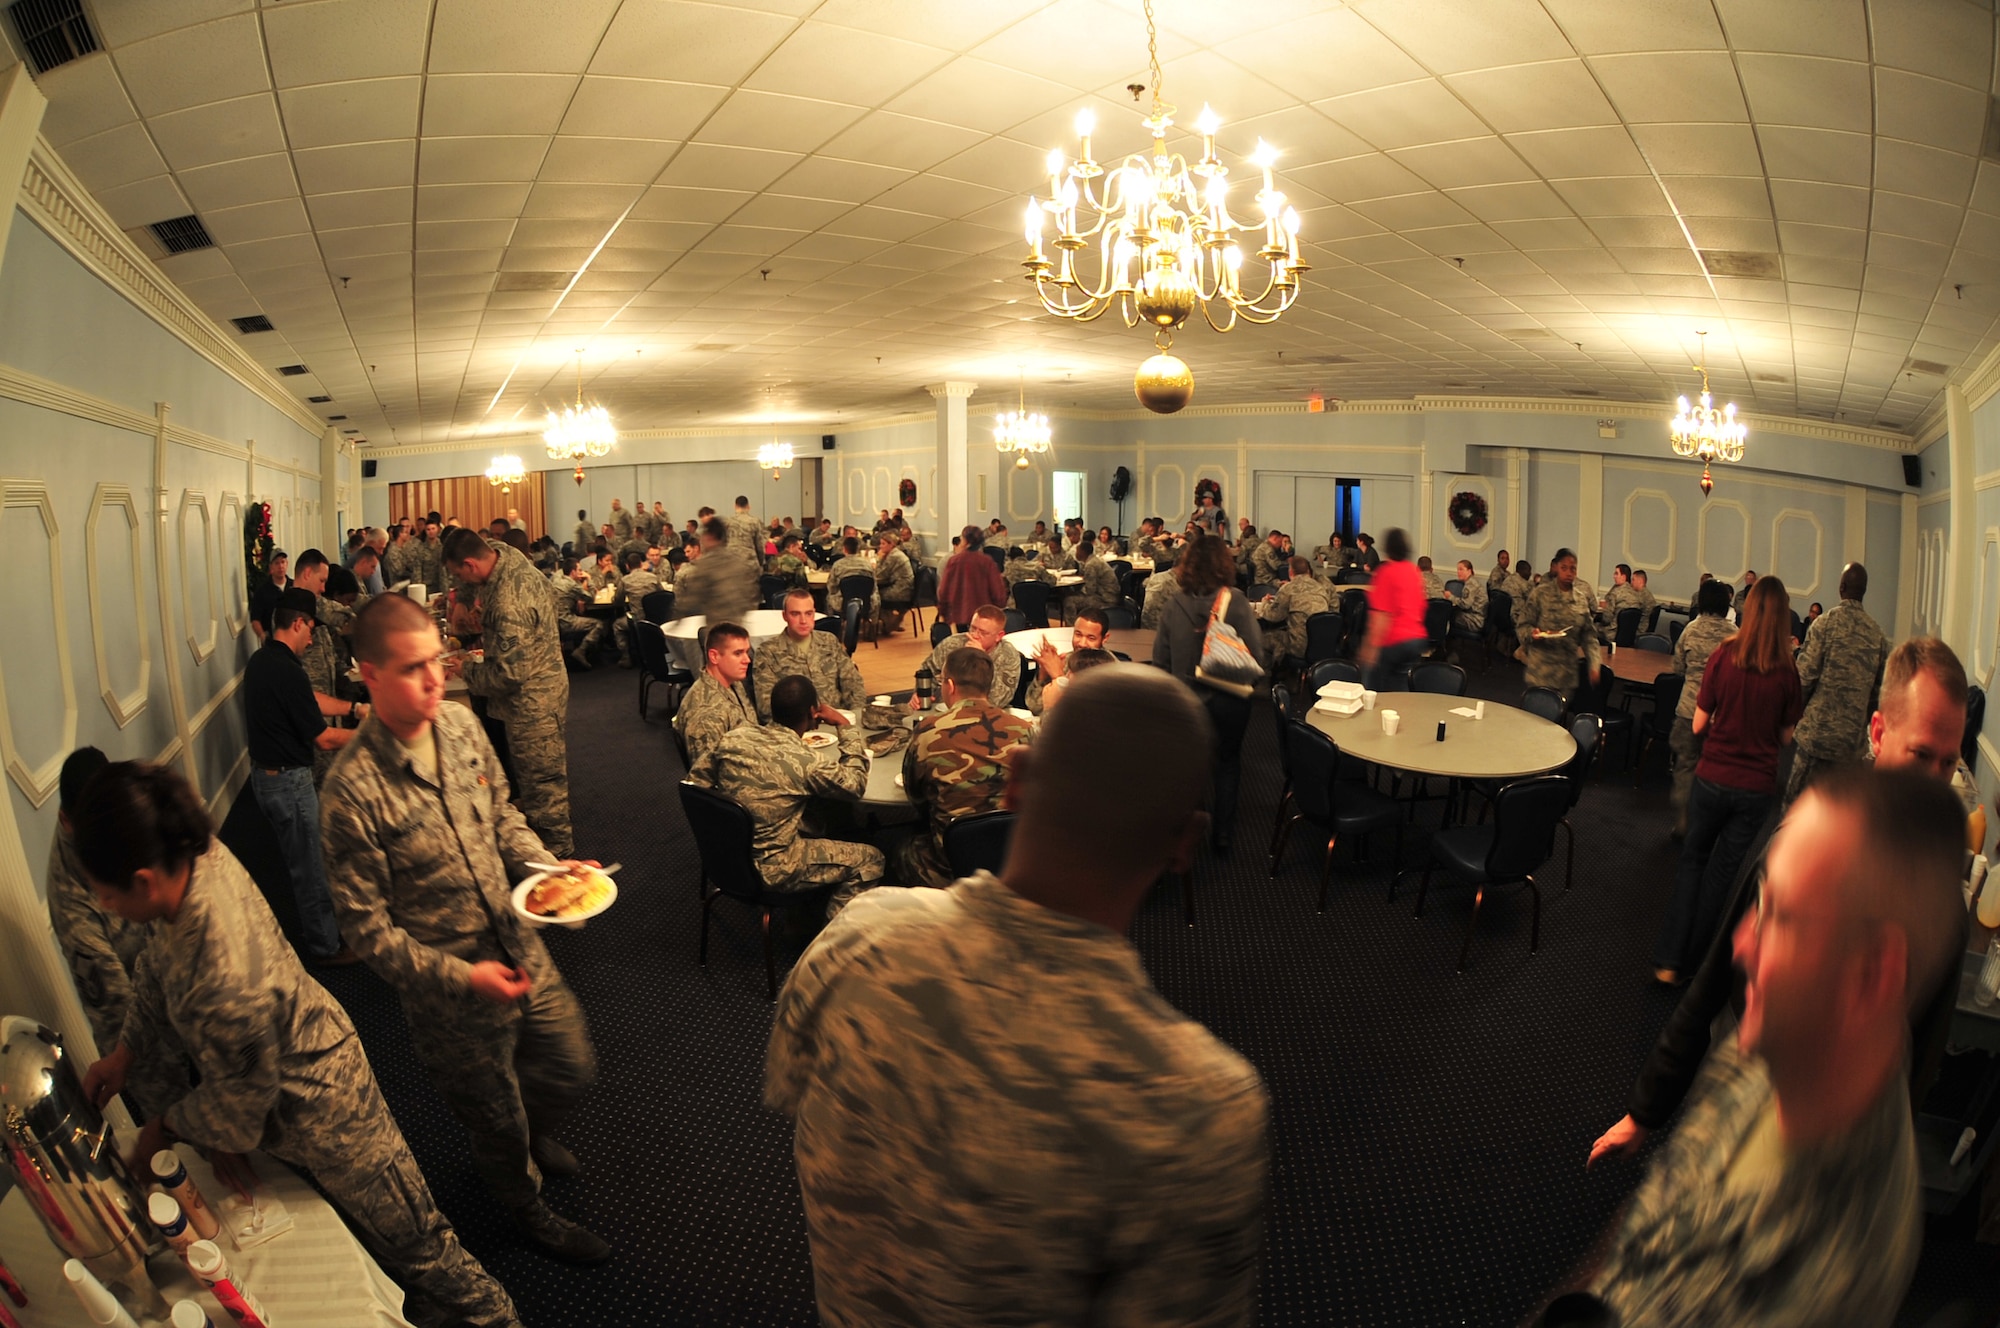 Airmen from the 4th Fighter Wing gather in the consolidated club ball room to enjoy a Chief's Pancake Breakfast on Seymour Johnson Air Force Base, N.C., Nov. 20, 2009. The Chief's Group served more than 700 Airmen during breakfast. The money raised will go toward events for the enlisted Airmen stationed on Seymour Johnson. (U.S. Air Force photo/Airman 1st Class Rae Perry)